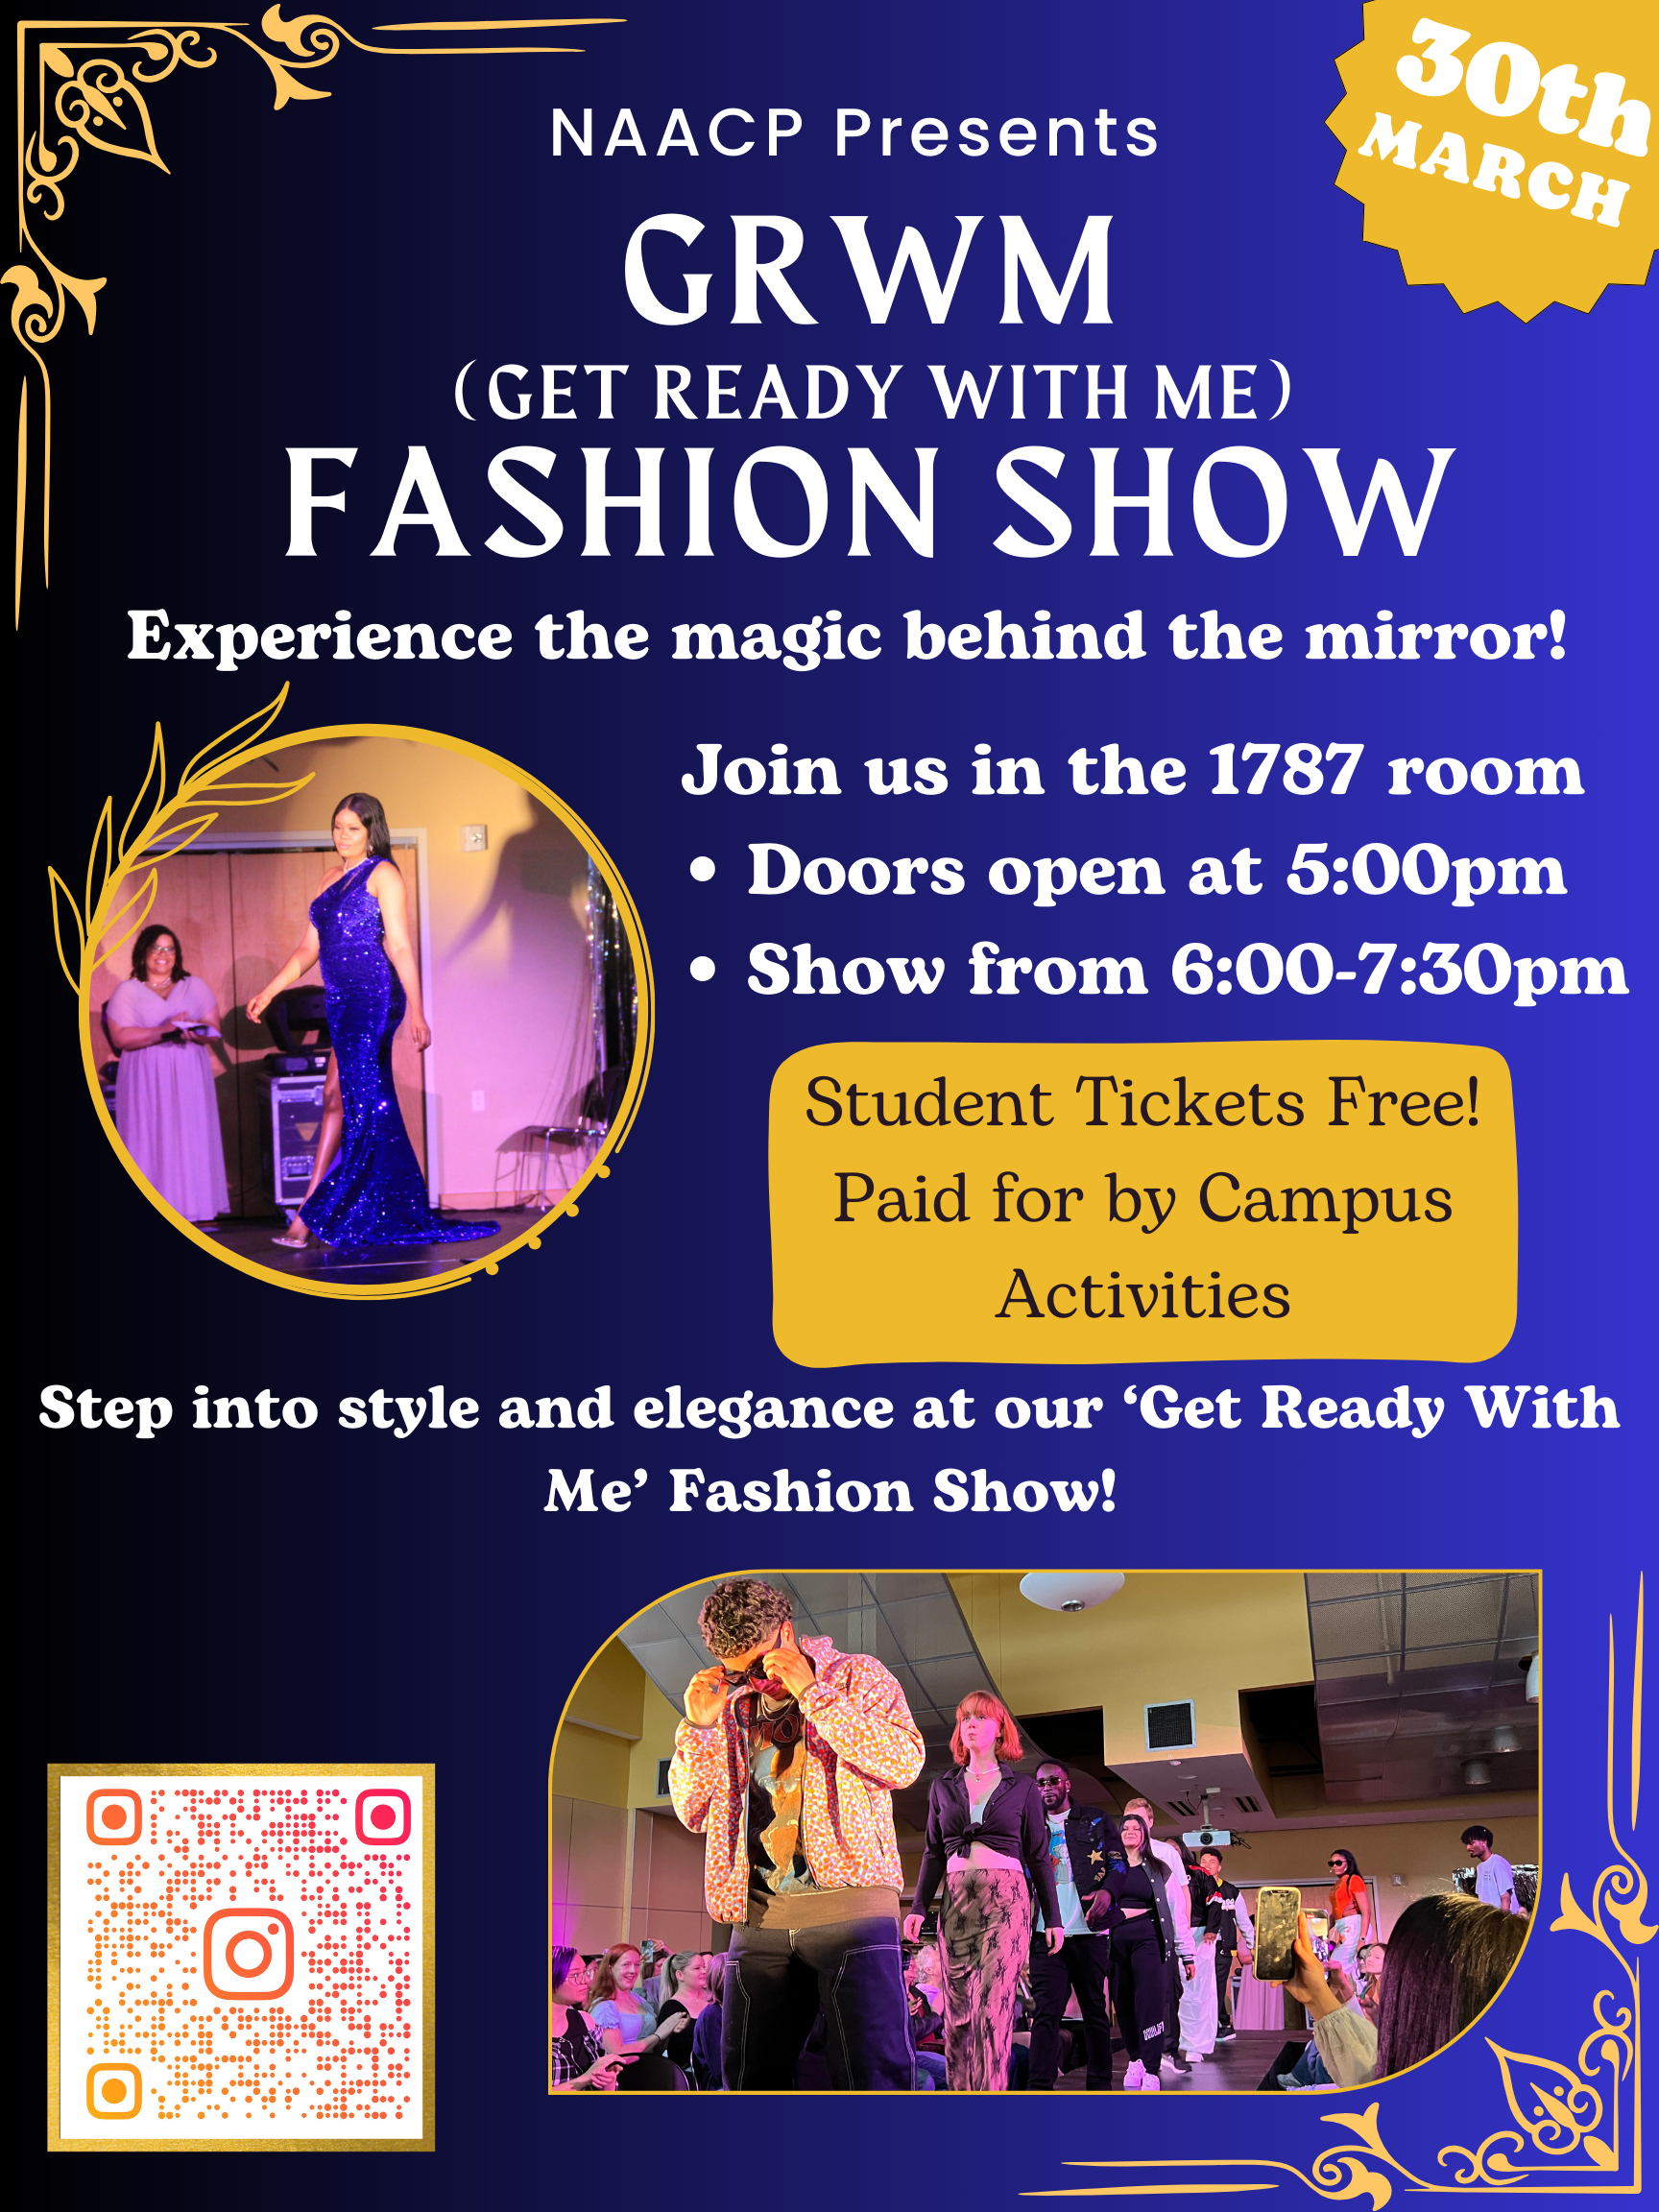 NAACP Fashion Show: Get Your Tickets!